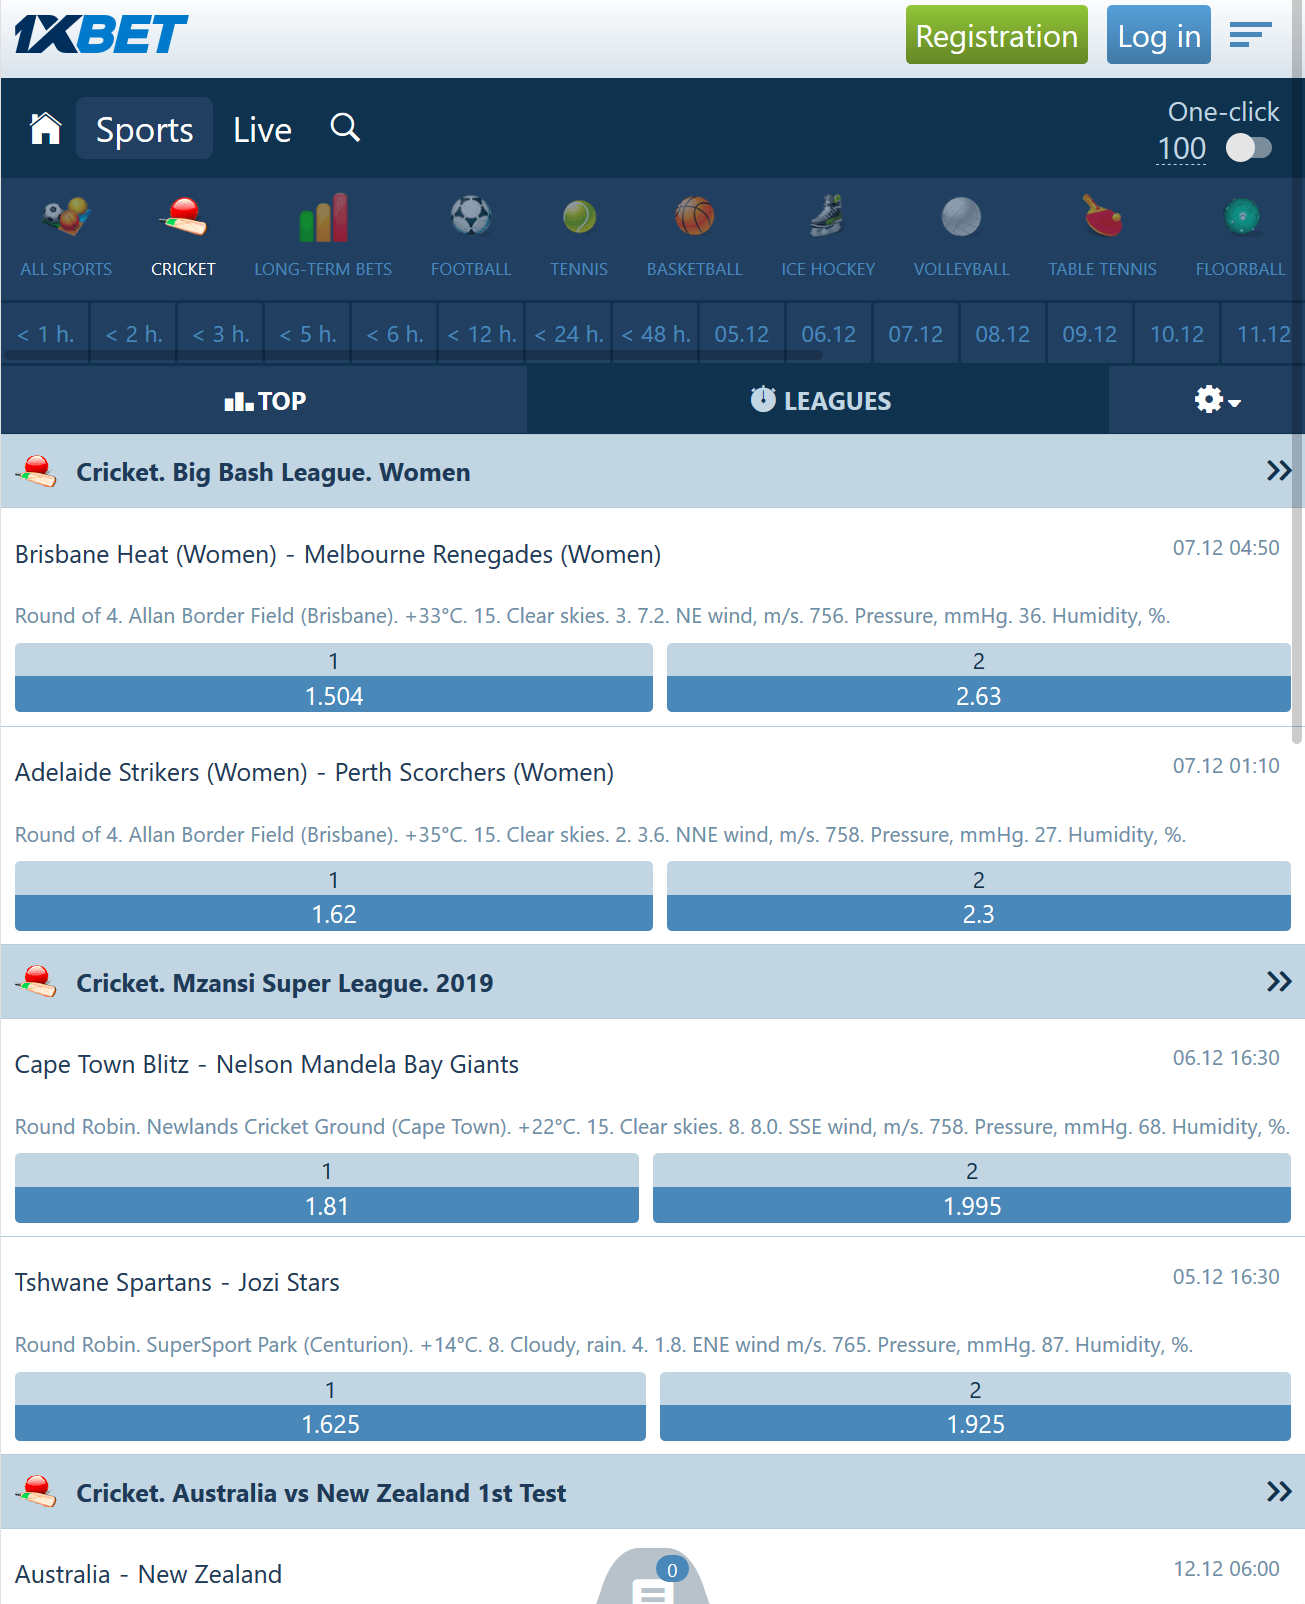 Picture of the odds section at 1xBet showing some different cirkcet betting markets.